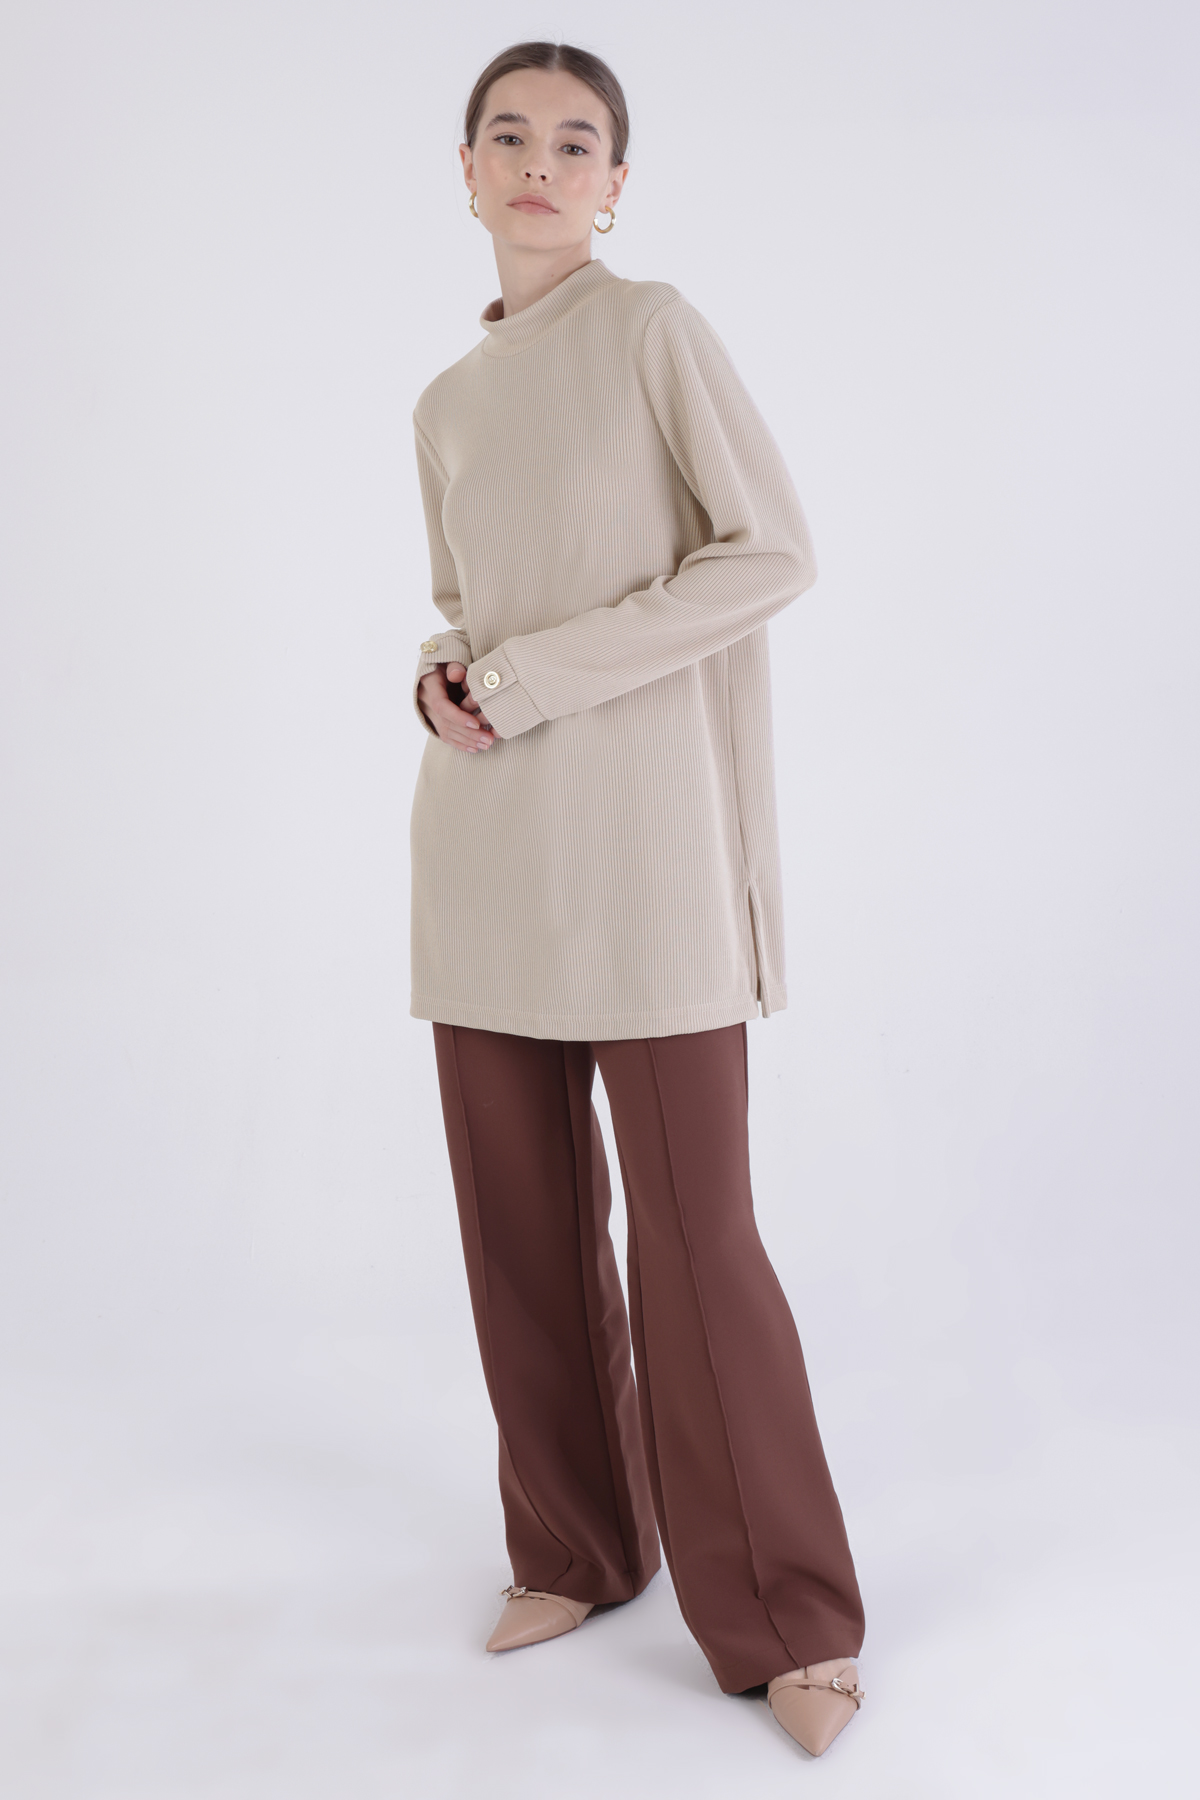 Slit Tunic with Button Cuffs